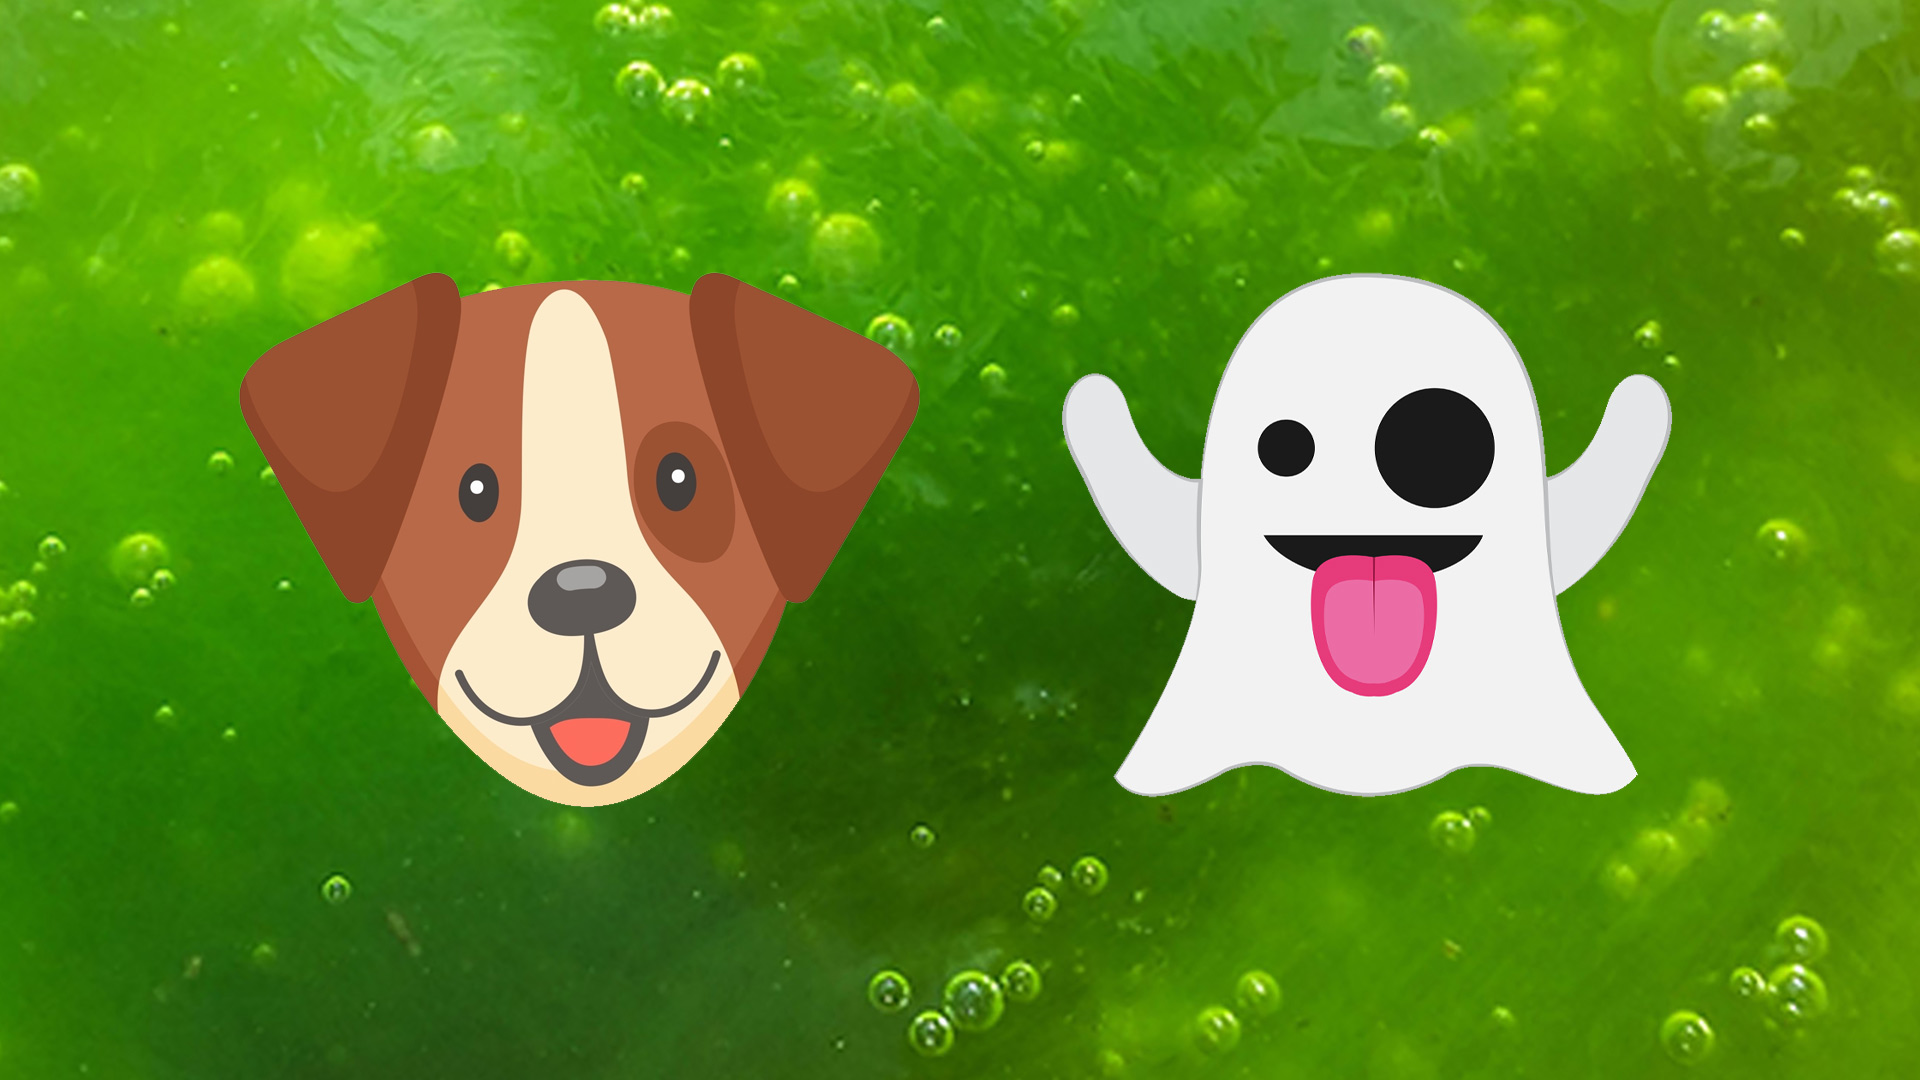 Emojis: a dog and a ghost